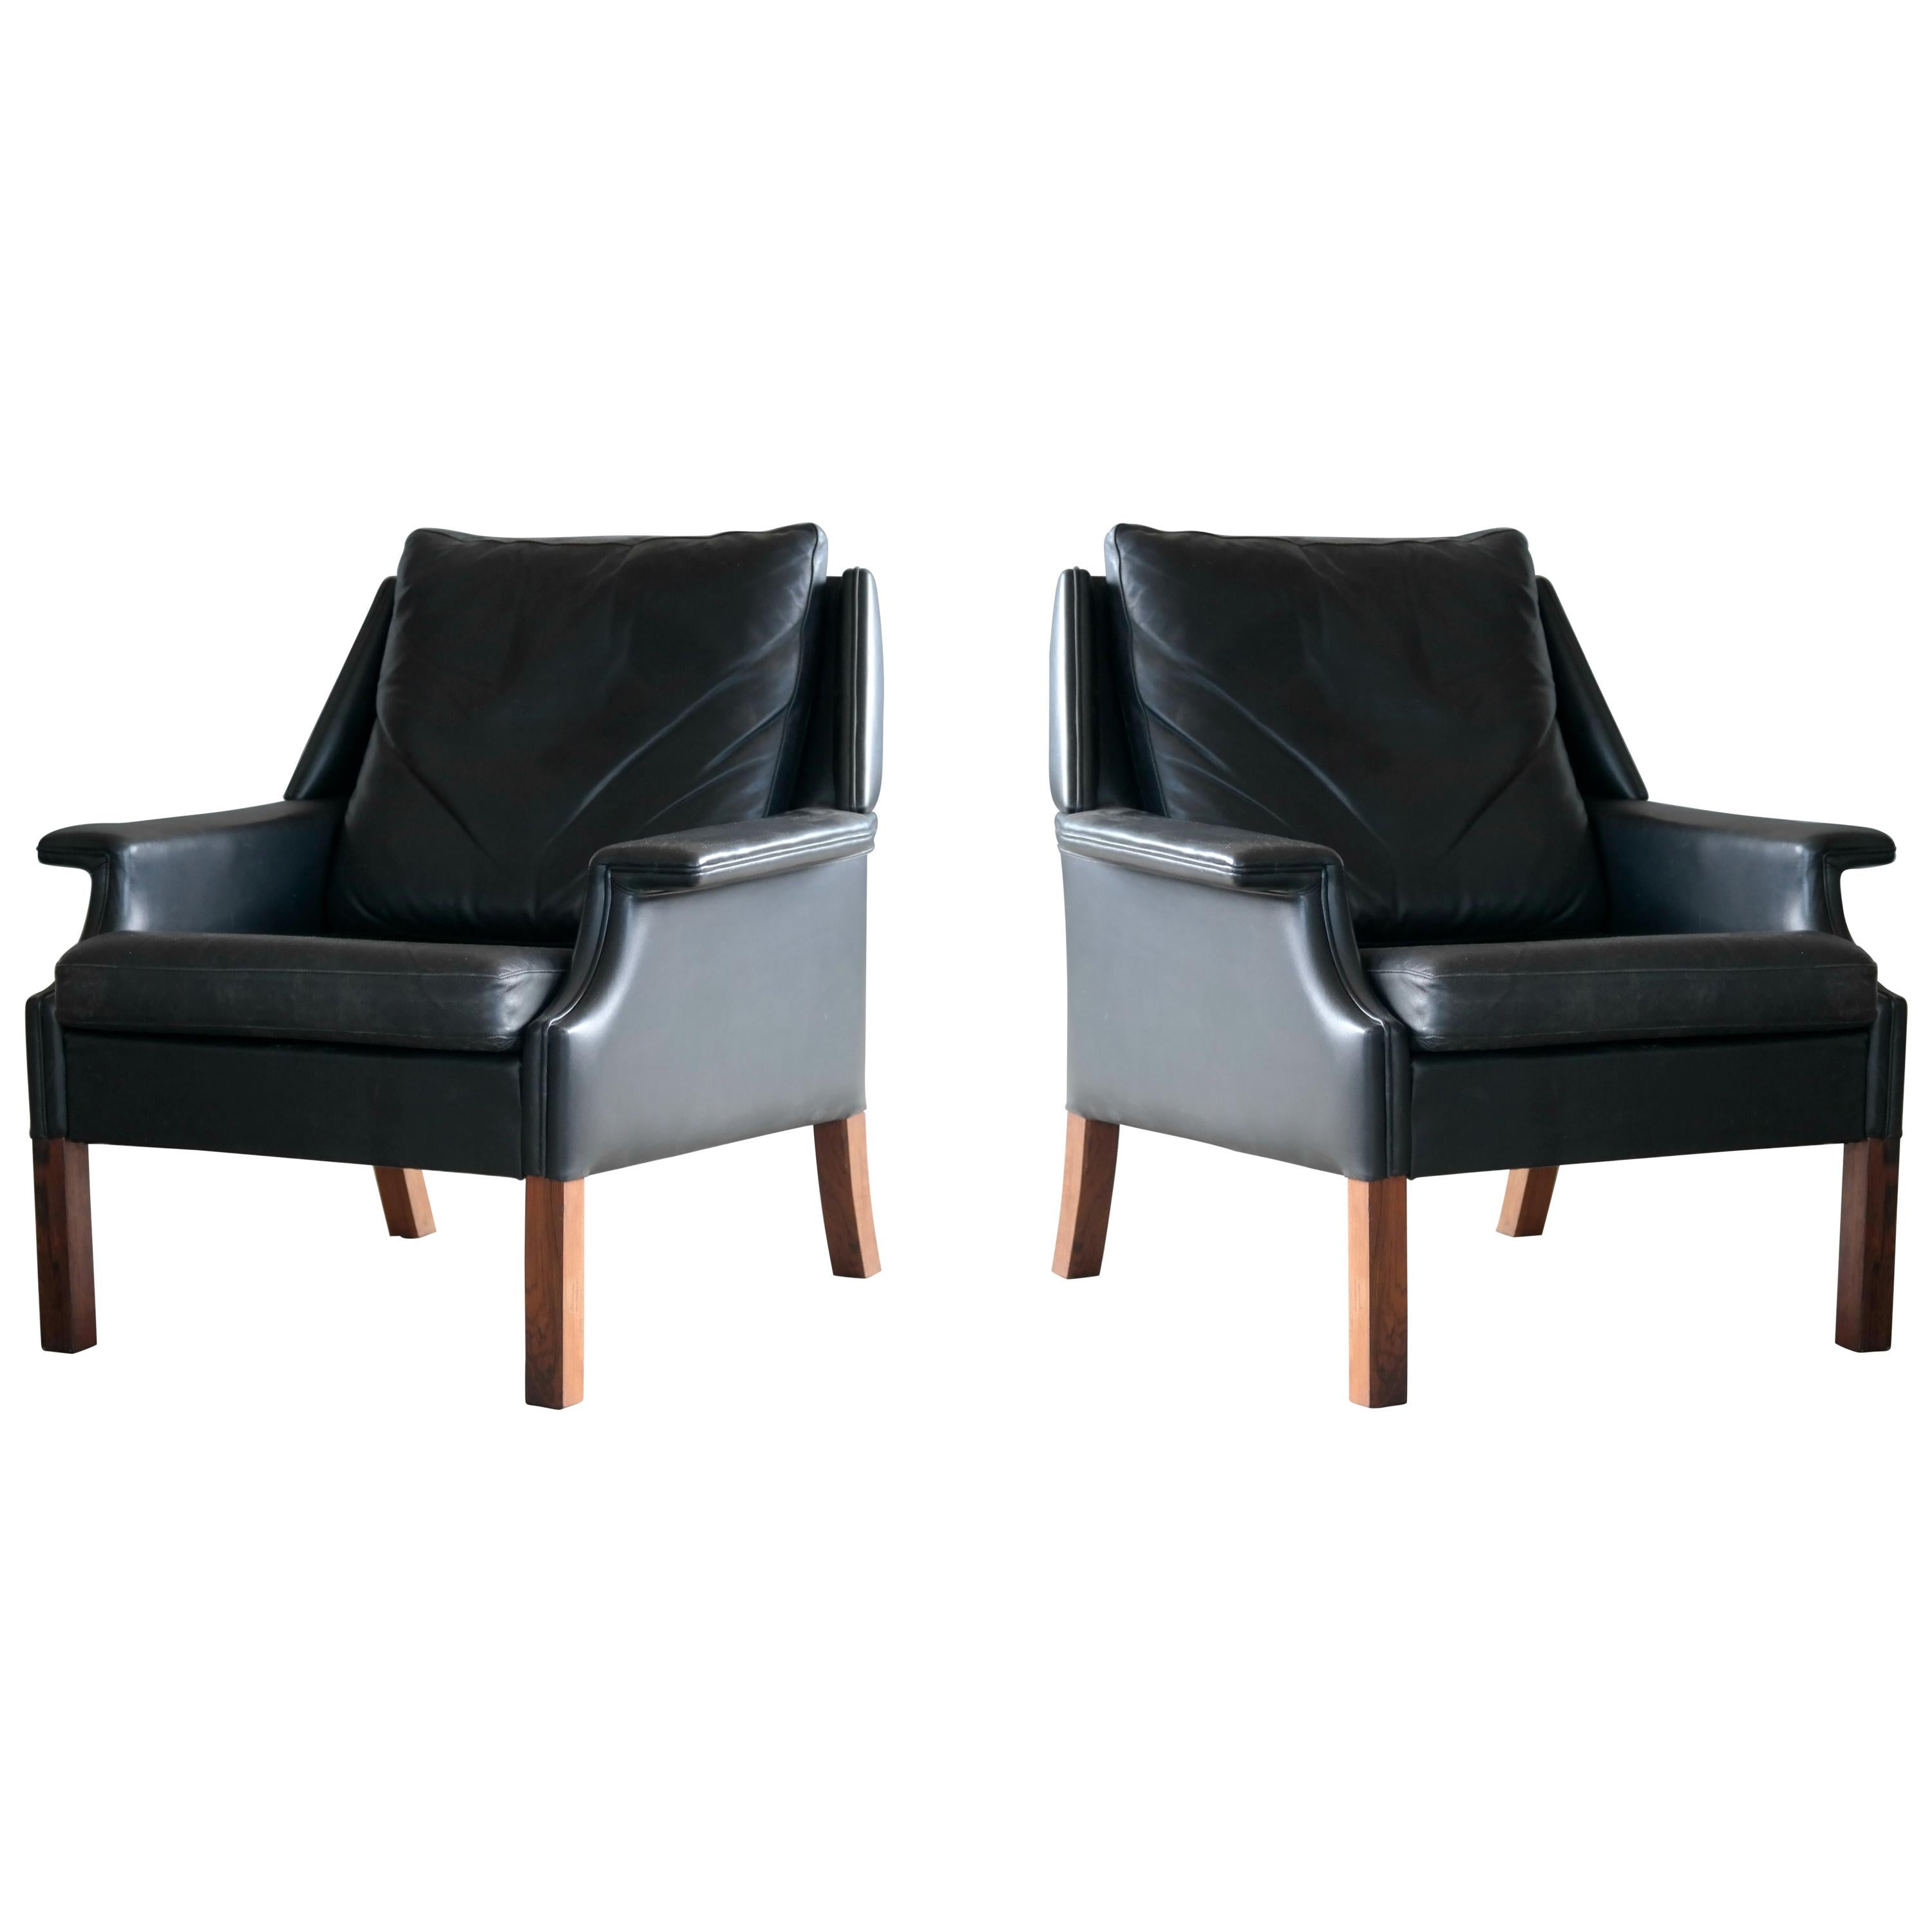 Pair of Danish Midcentury Børge Mogensen Style Black Leather Lounge Chairs